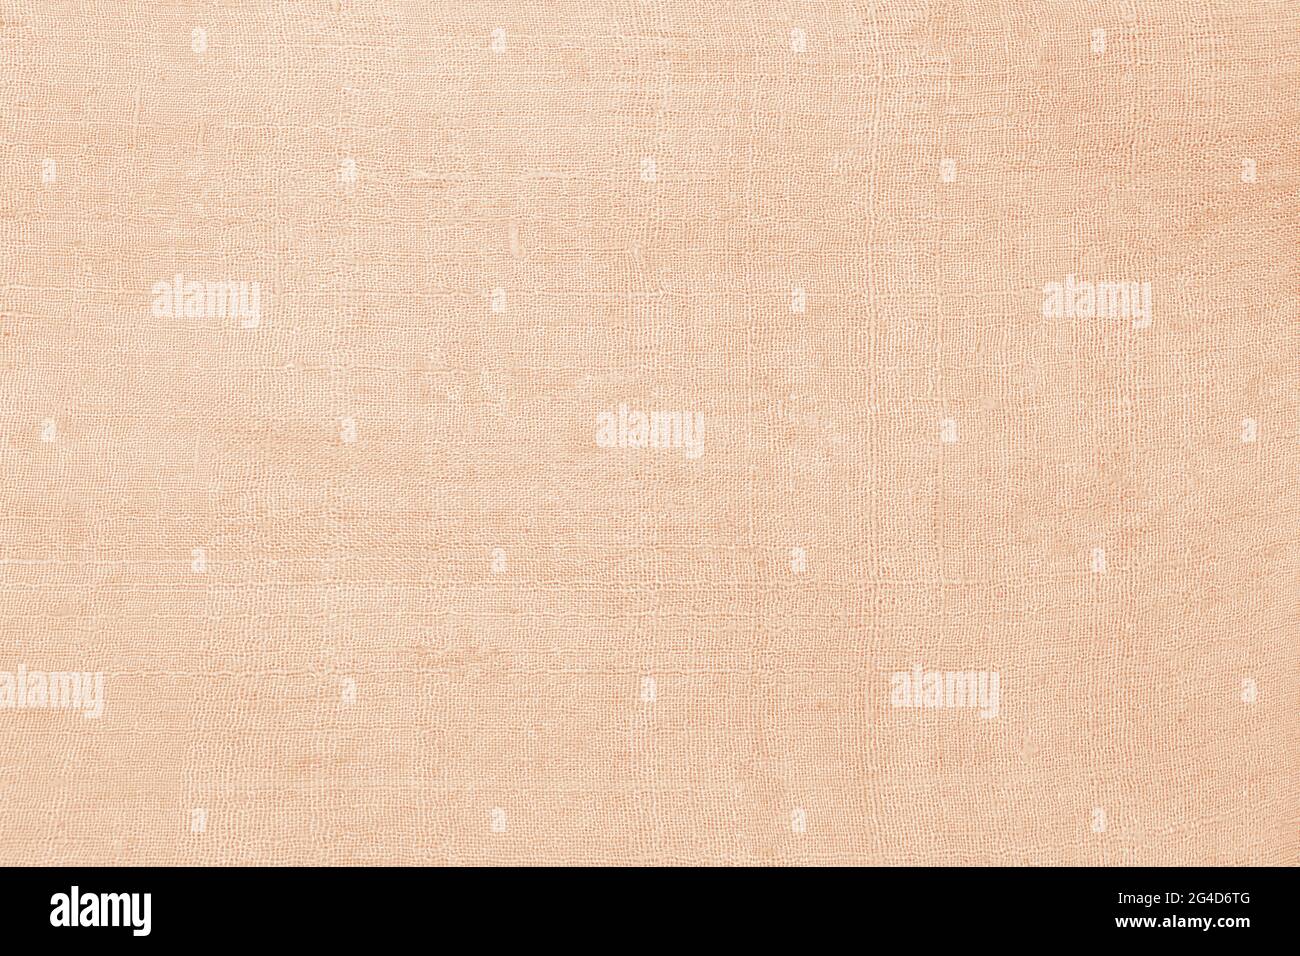 Brown linen fabric texture or background, horizontal shape Stock Photo